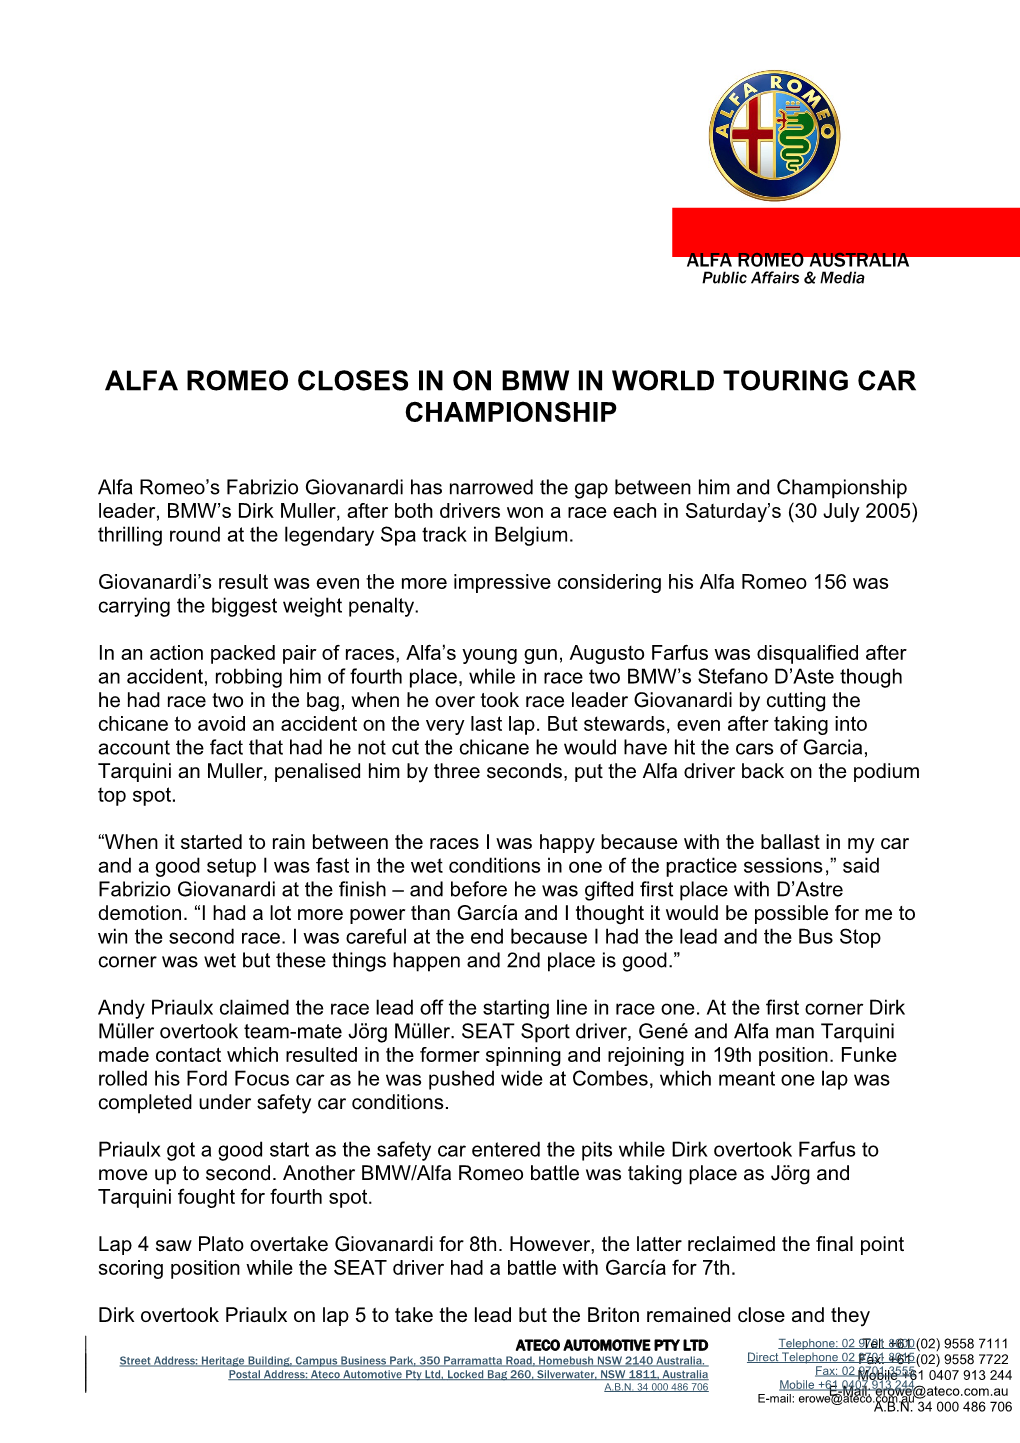 Alfa Romeo Closes in on Bmw in World Touring Car Championship